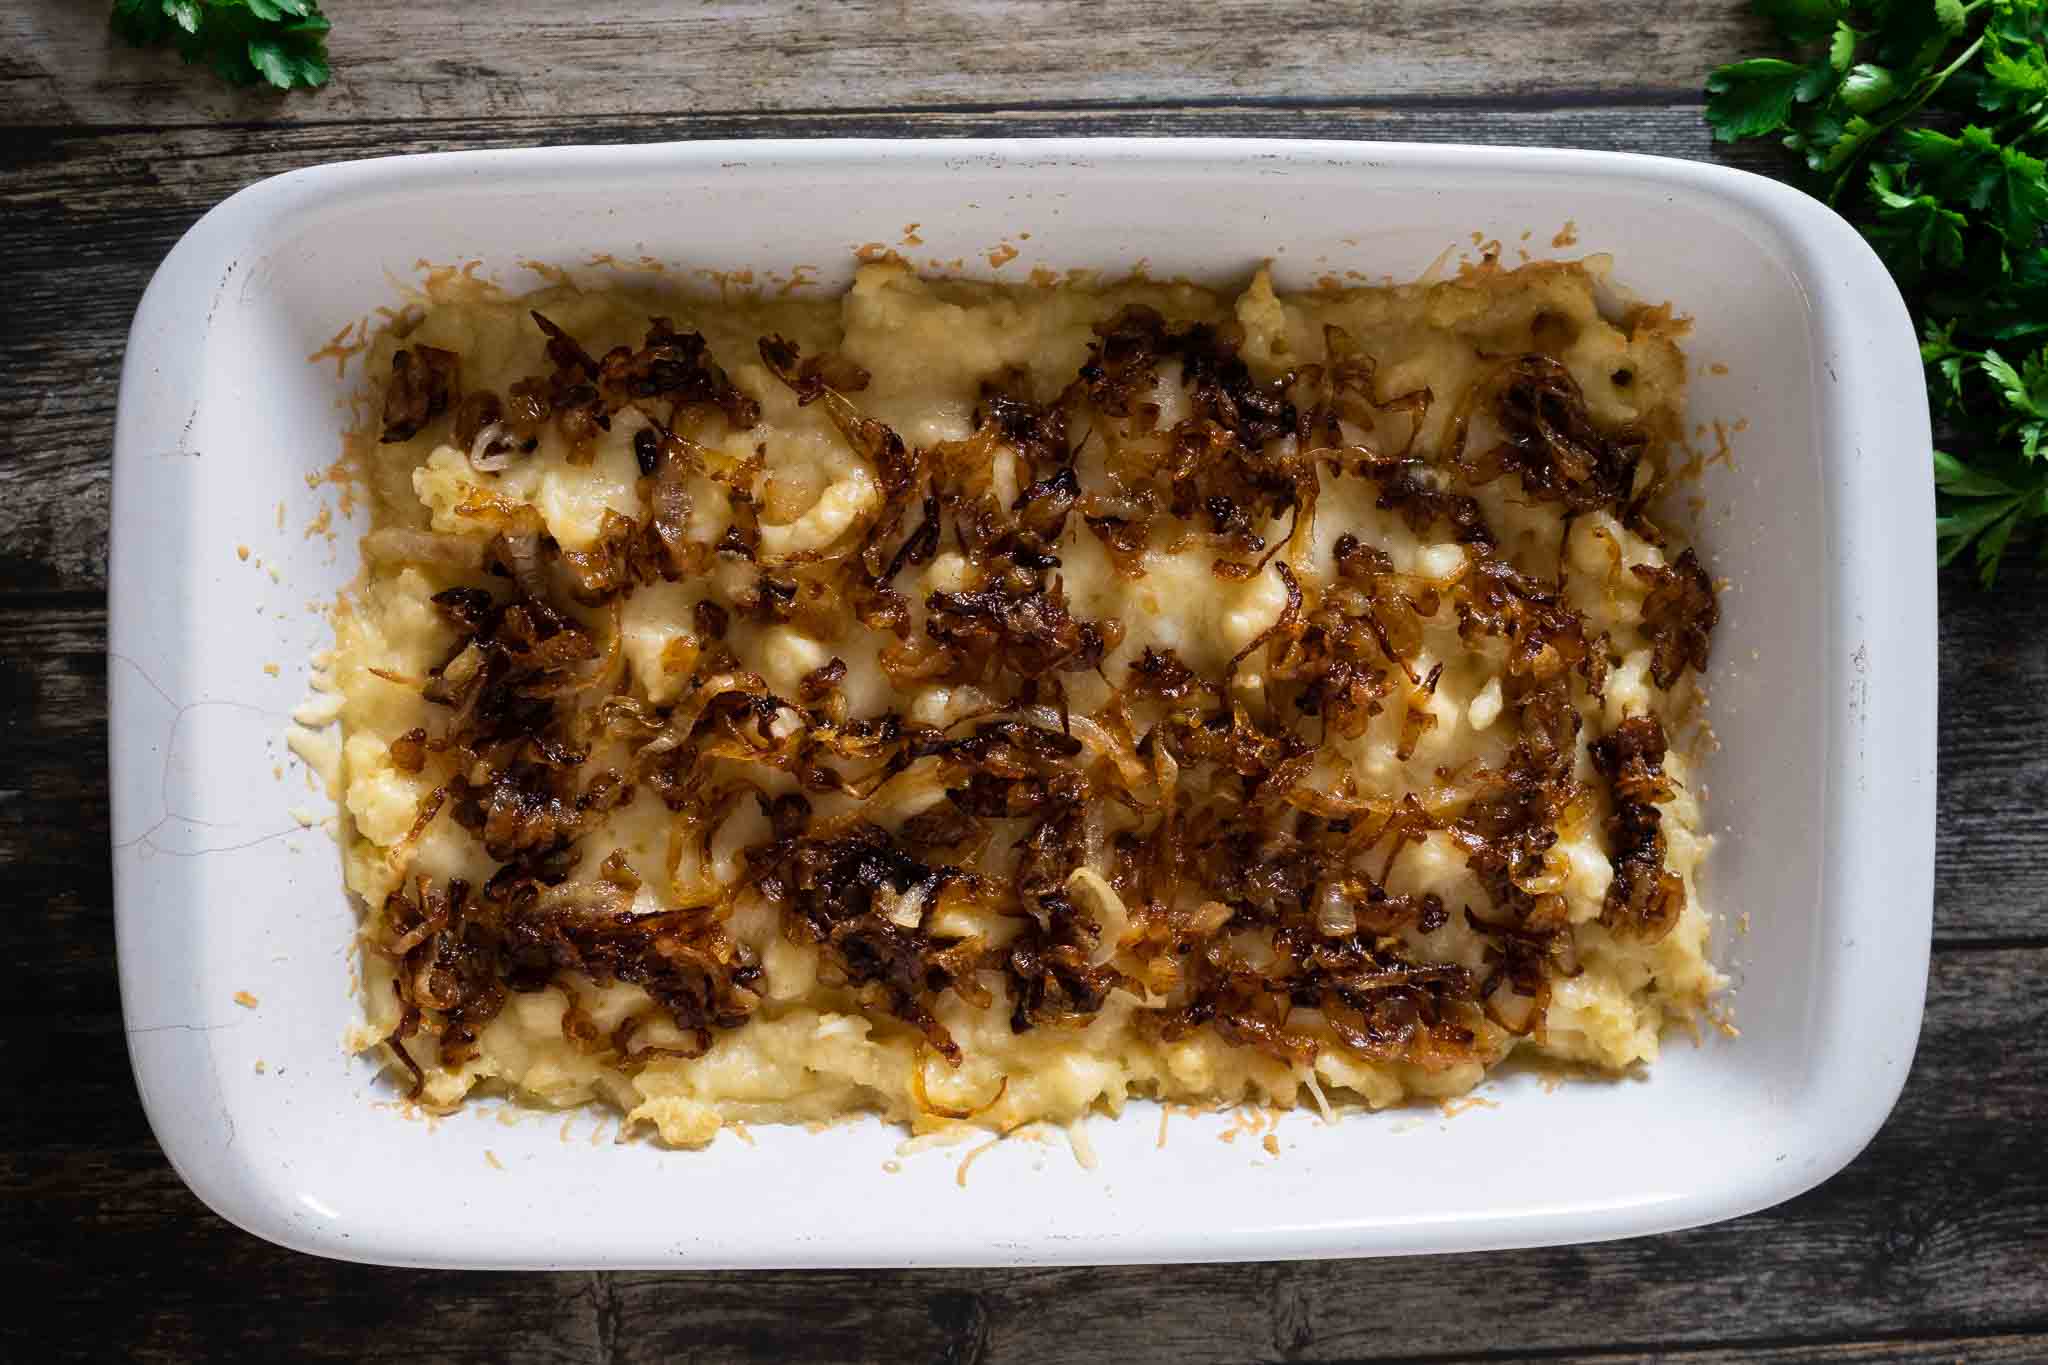 A casserole dish full of cheesy spaetzle, with caramelized onions added on top.